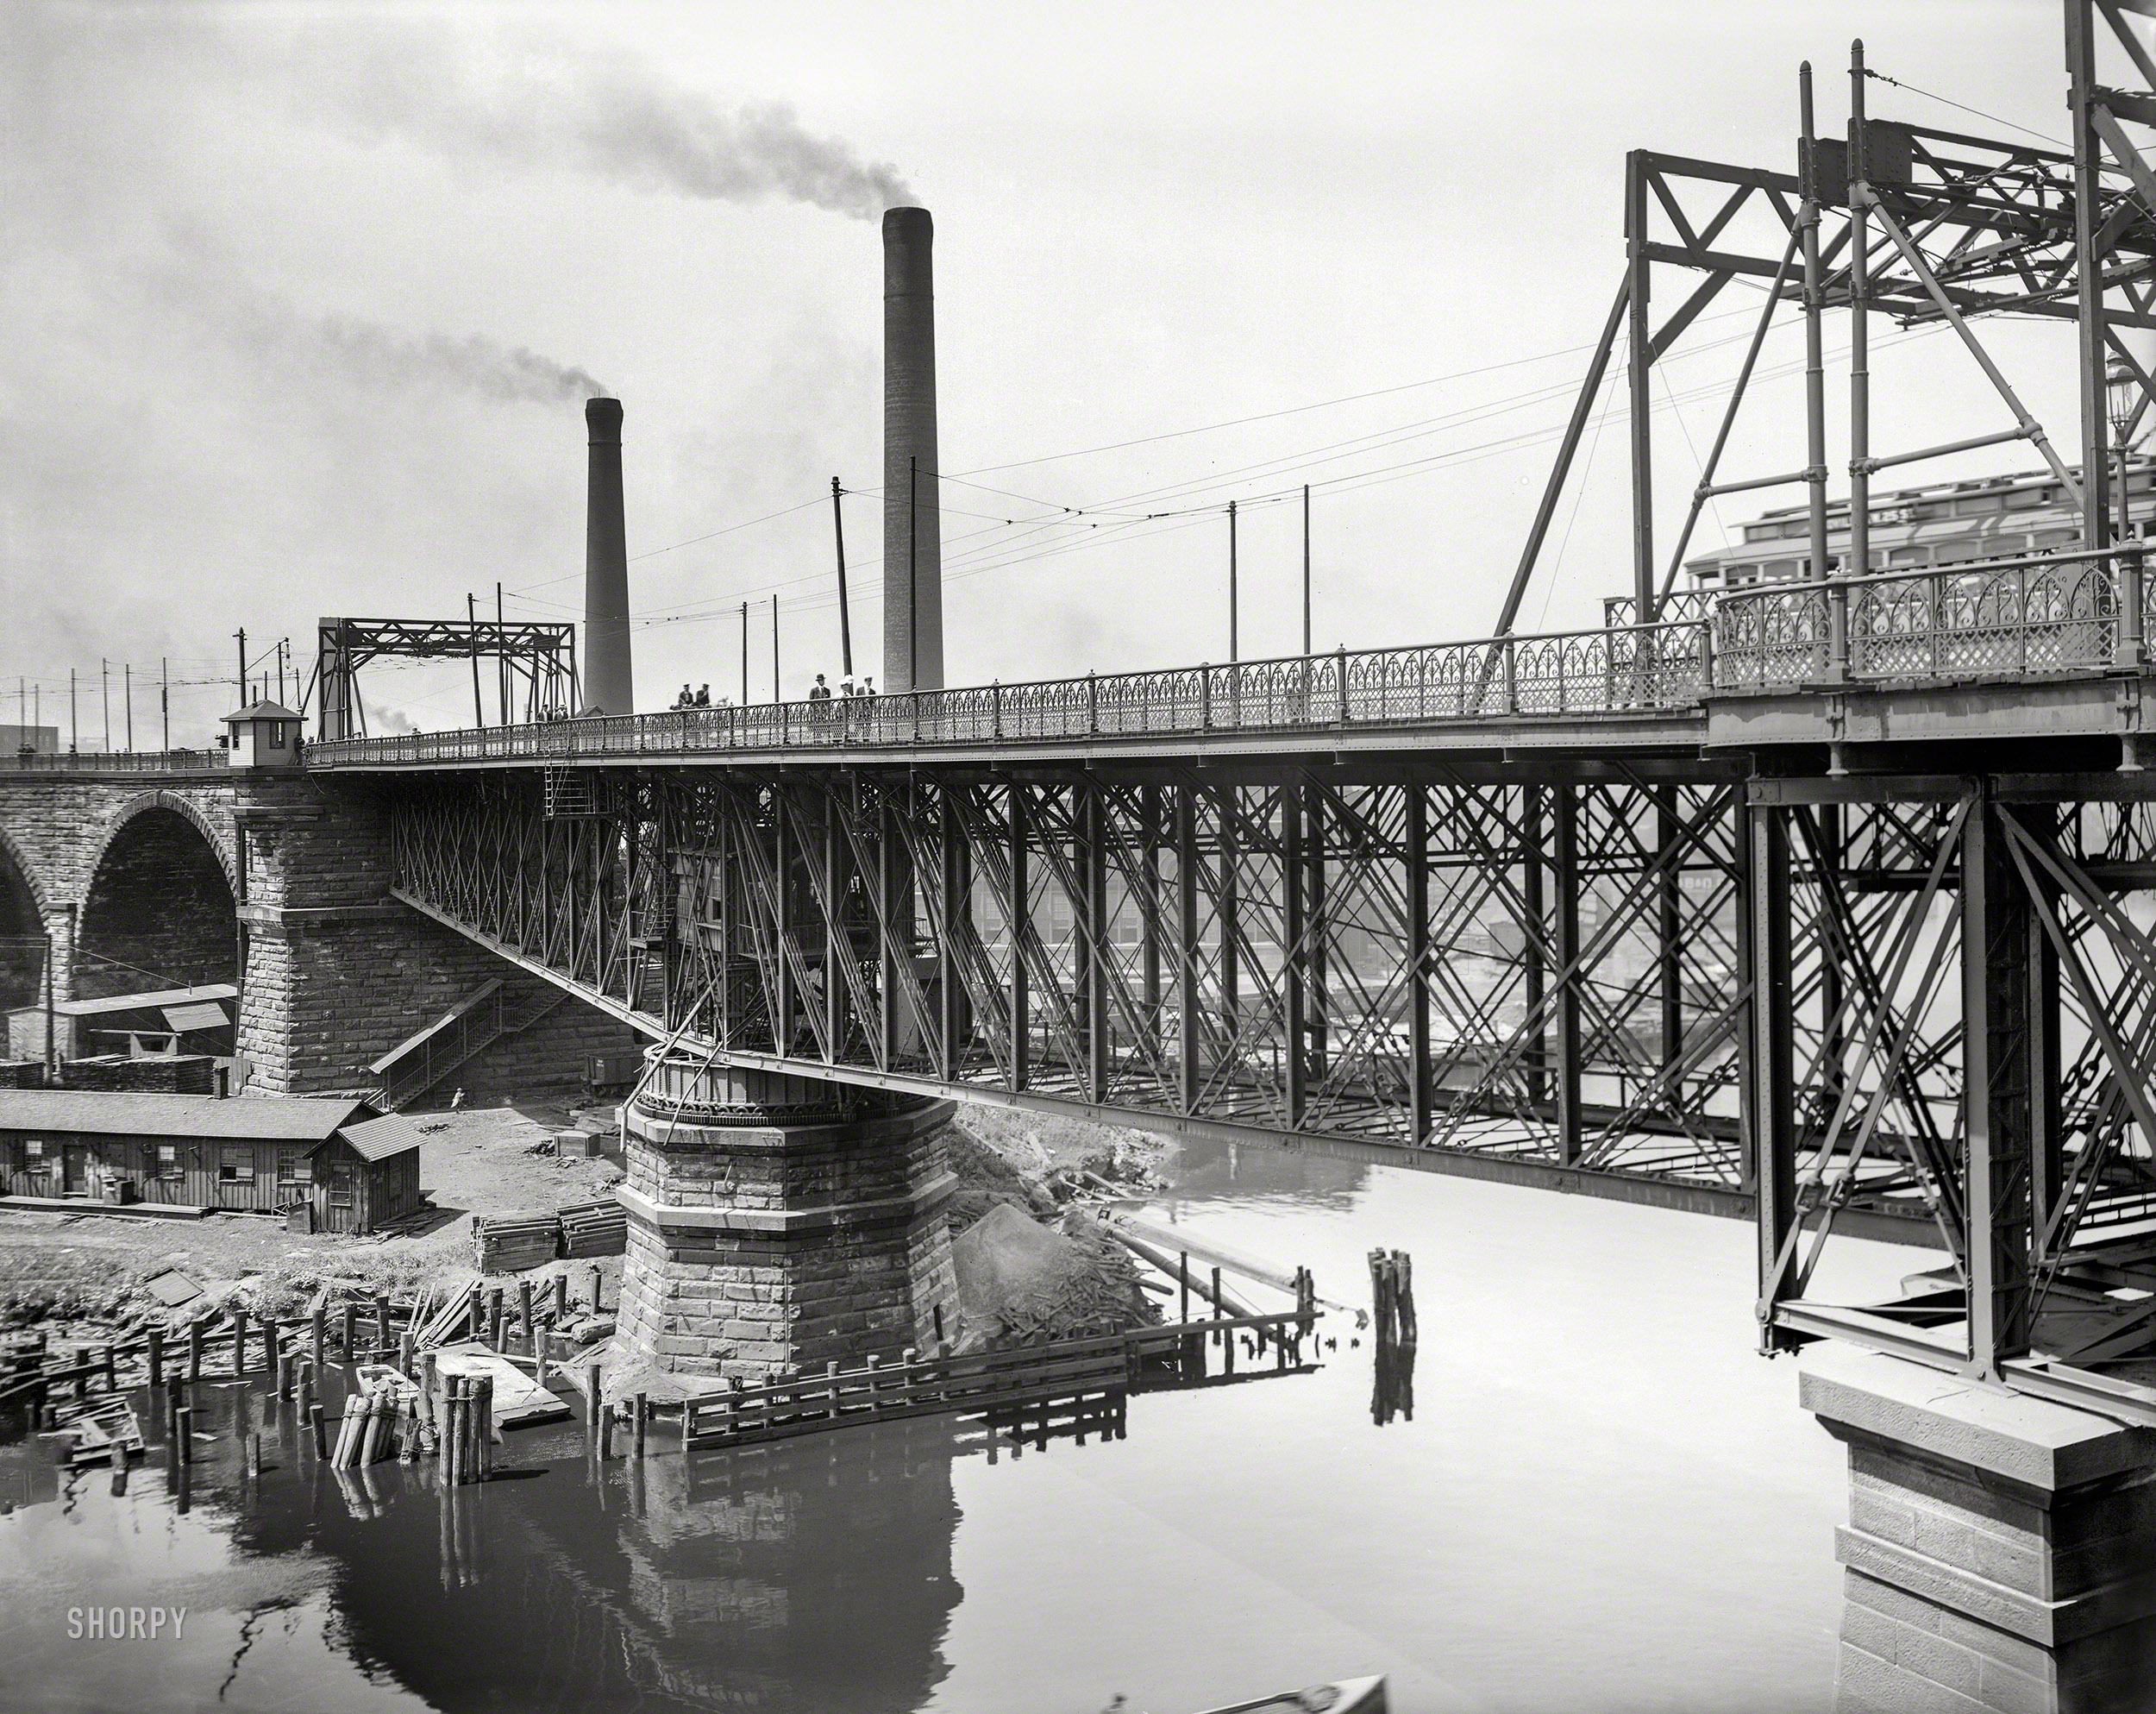 Cleveland, Ohio, circa 1910. "Superior Avenue viaduct over the Cuyahoga River." 8x10 inch dry plate glass negative, Detroit Publishing Company. View full size.